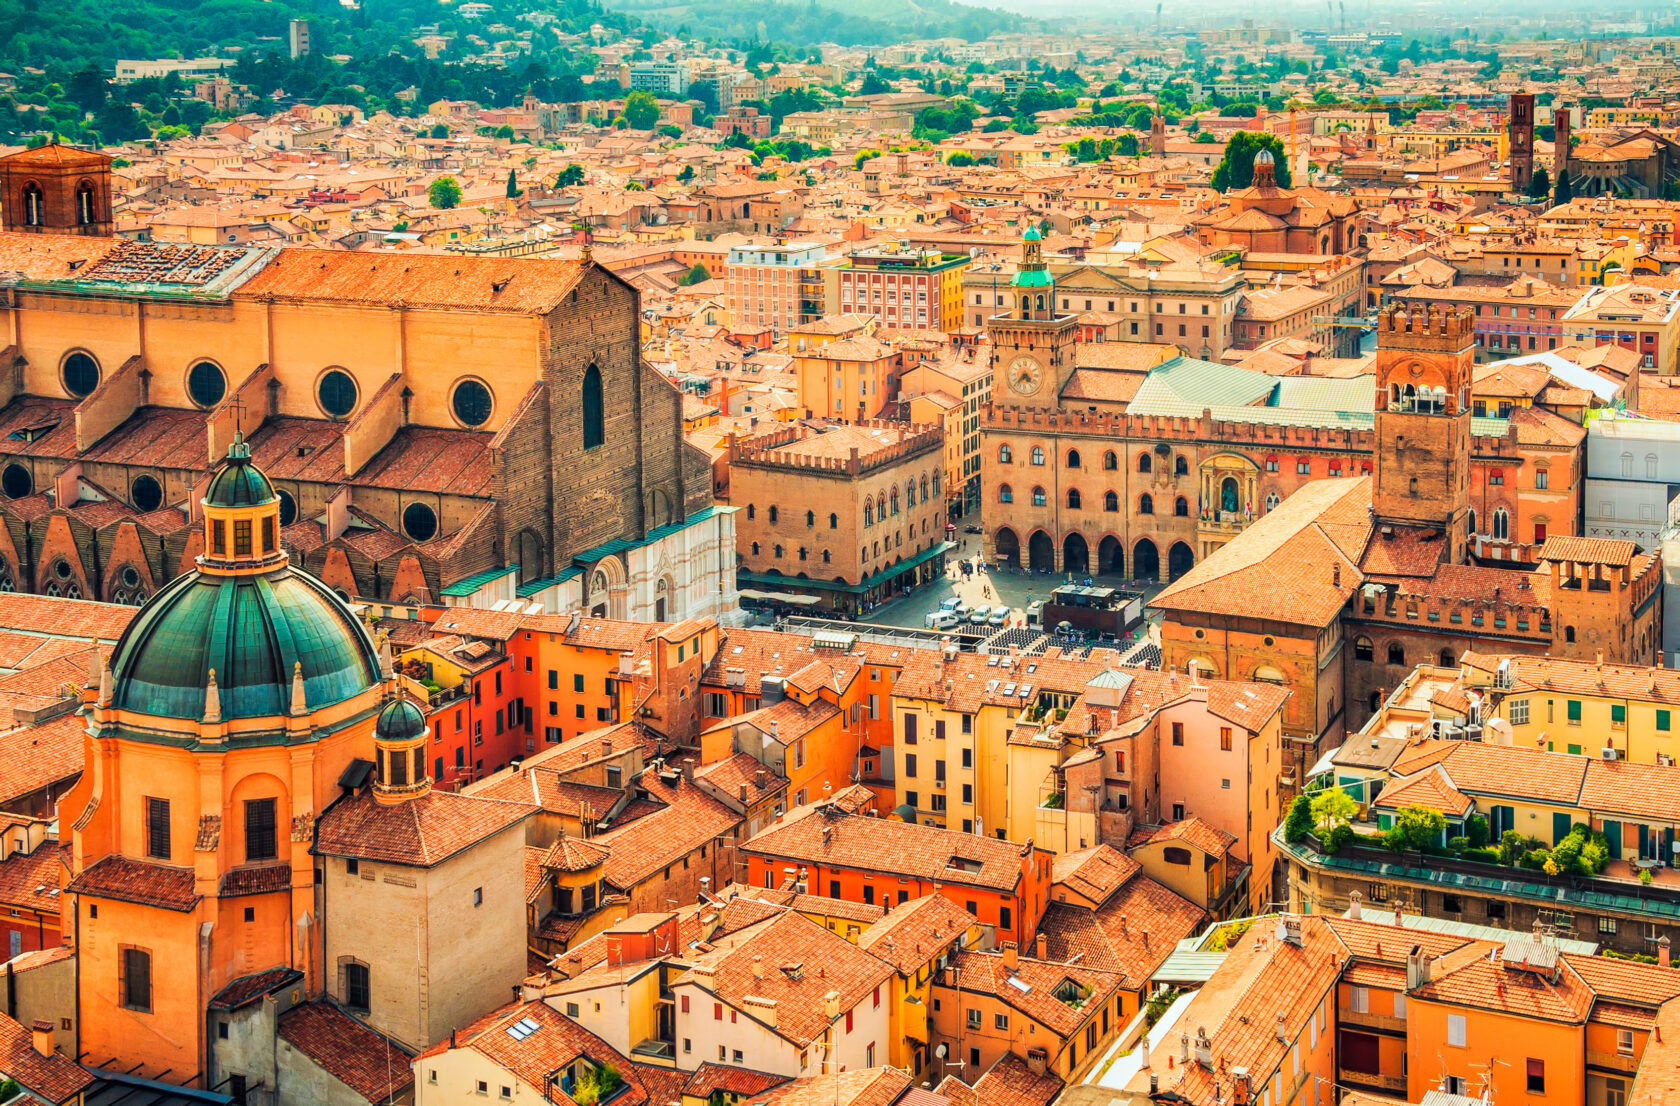 View of Piazza Maggiore square and San Petronio church in the city of Bologna, Italy (an Atlantis site).